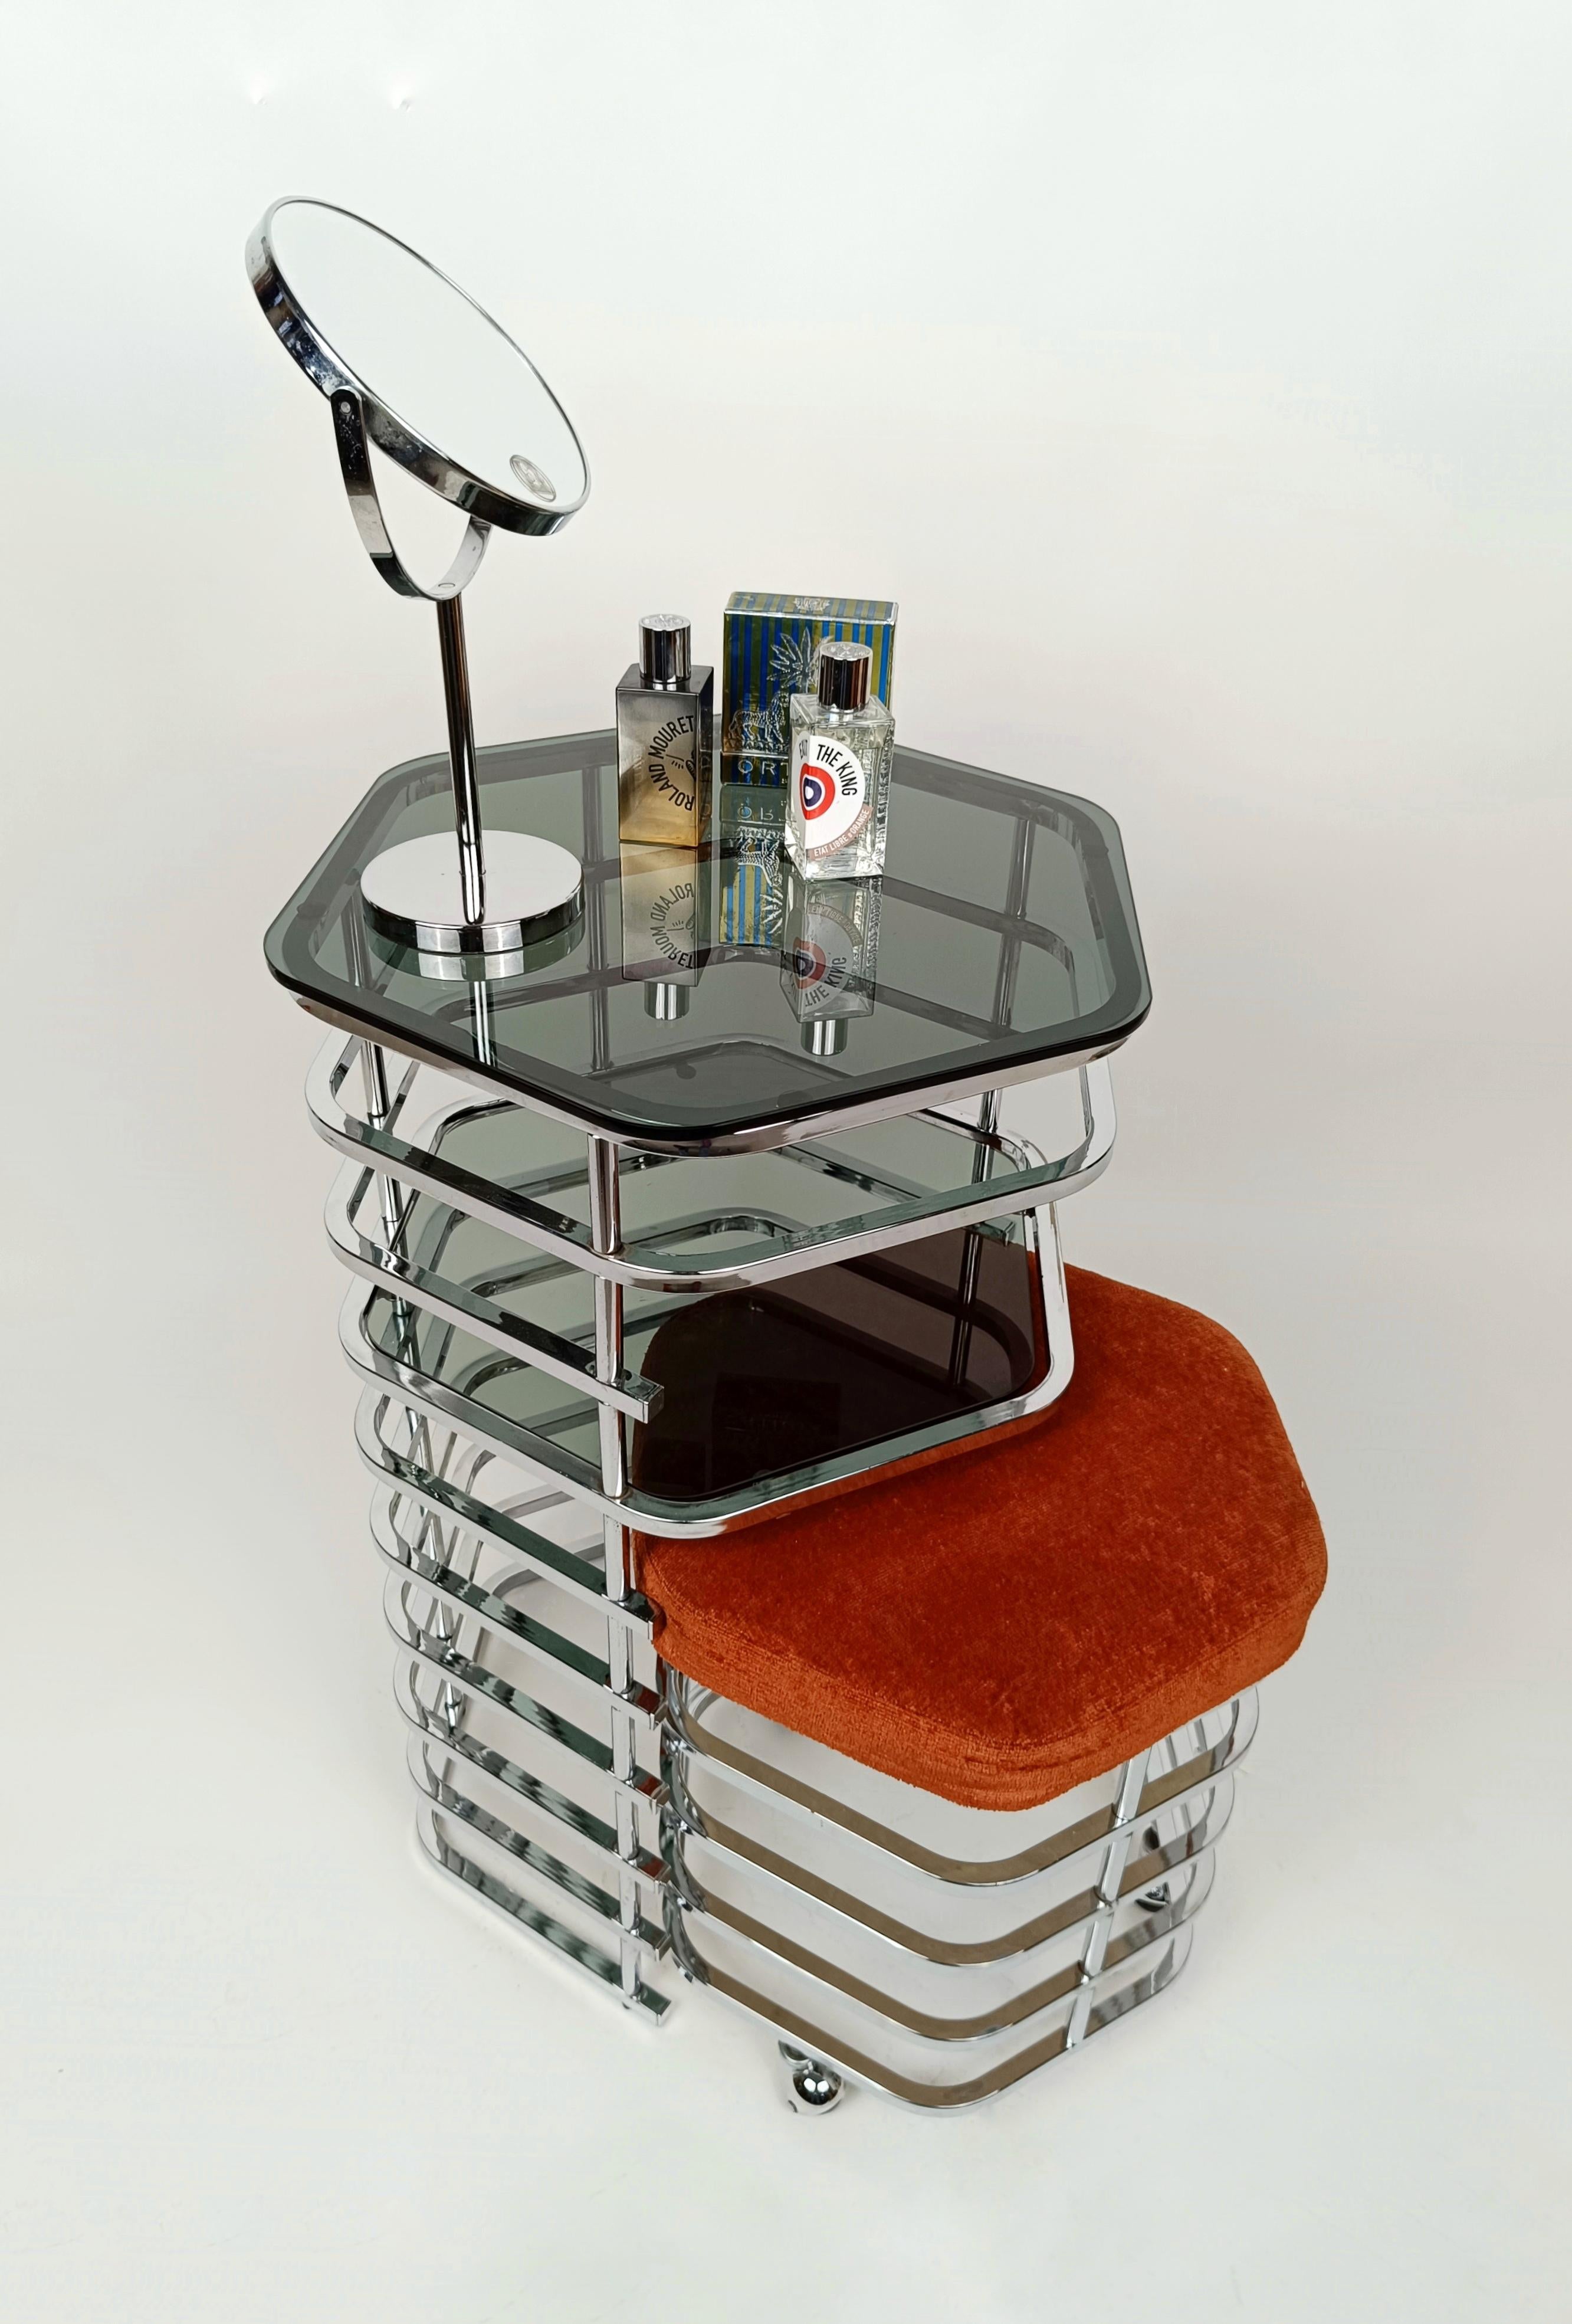 A dressing table with sparkling and mirrored chrome like the rims of vintage cars.
Made in Italy between the 60s and 70s, it is composed of two modules, a practical hexagonal section support surface in which you can also store its matching